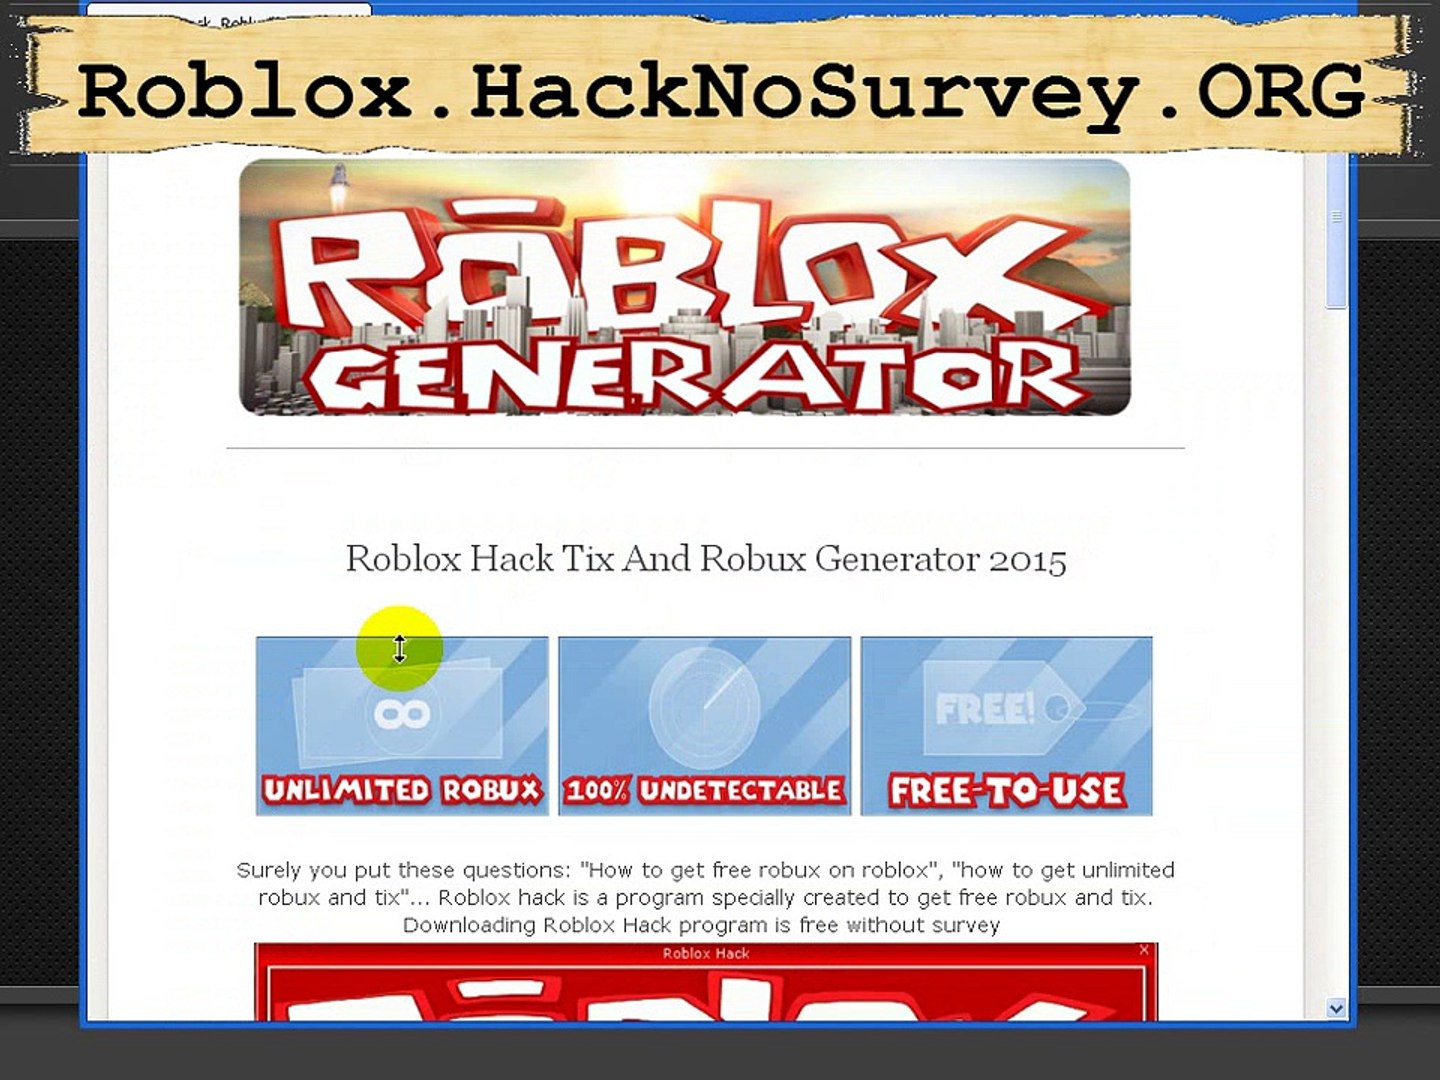 Roblox hack 2015 - How to get UNLIMITED Robux and Tix 2015 - 